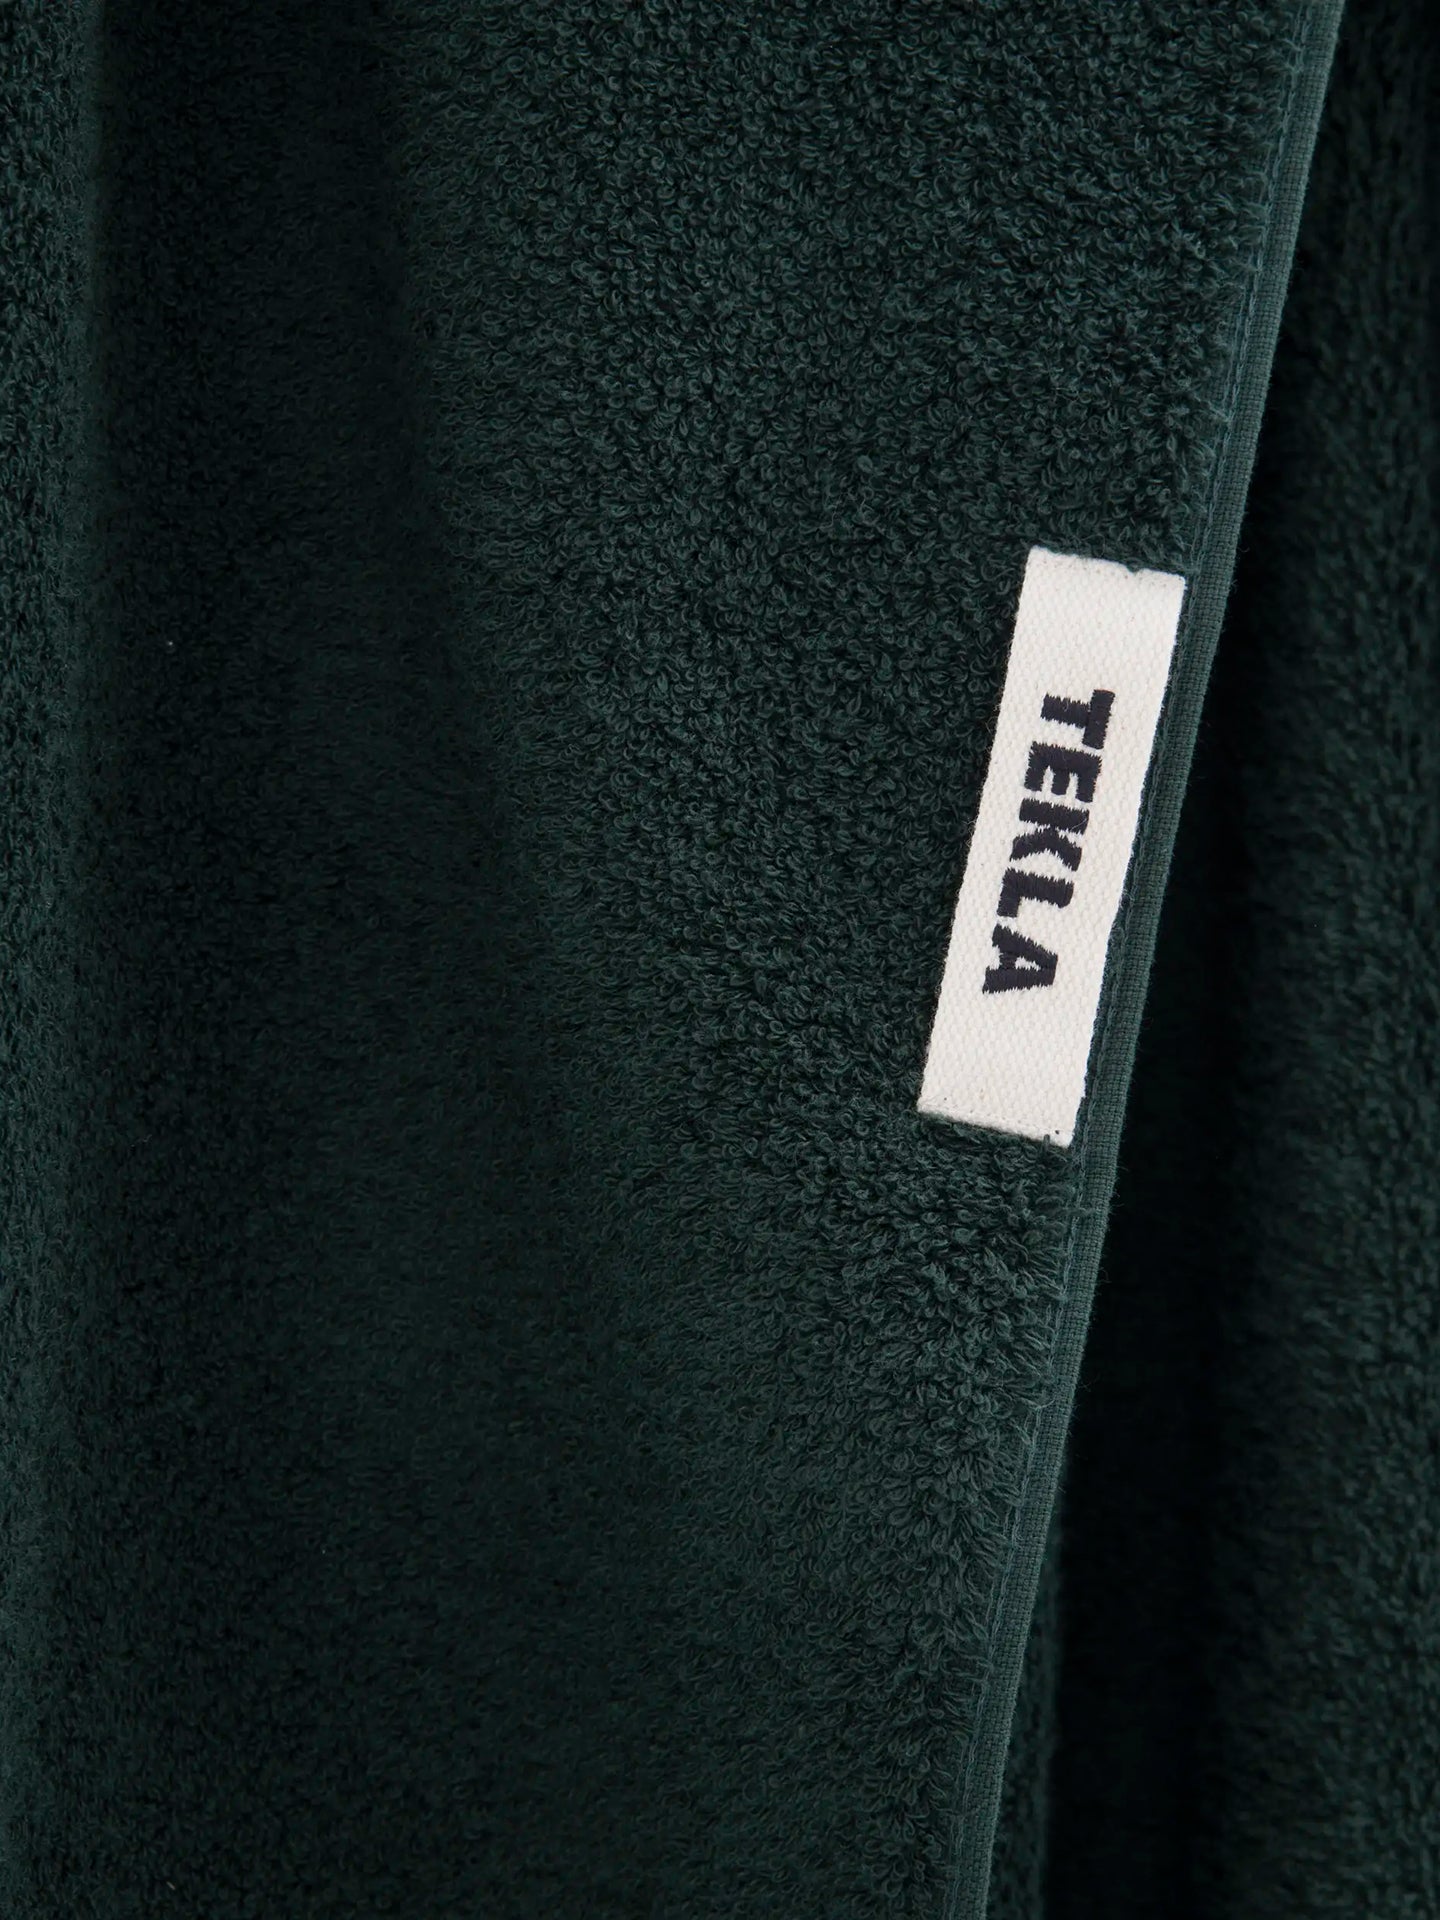 Terry Hand Towel, Solid forest green